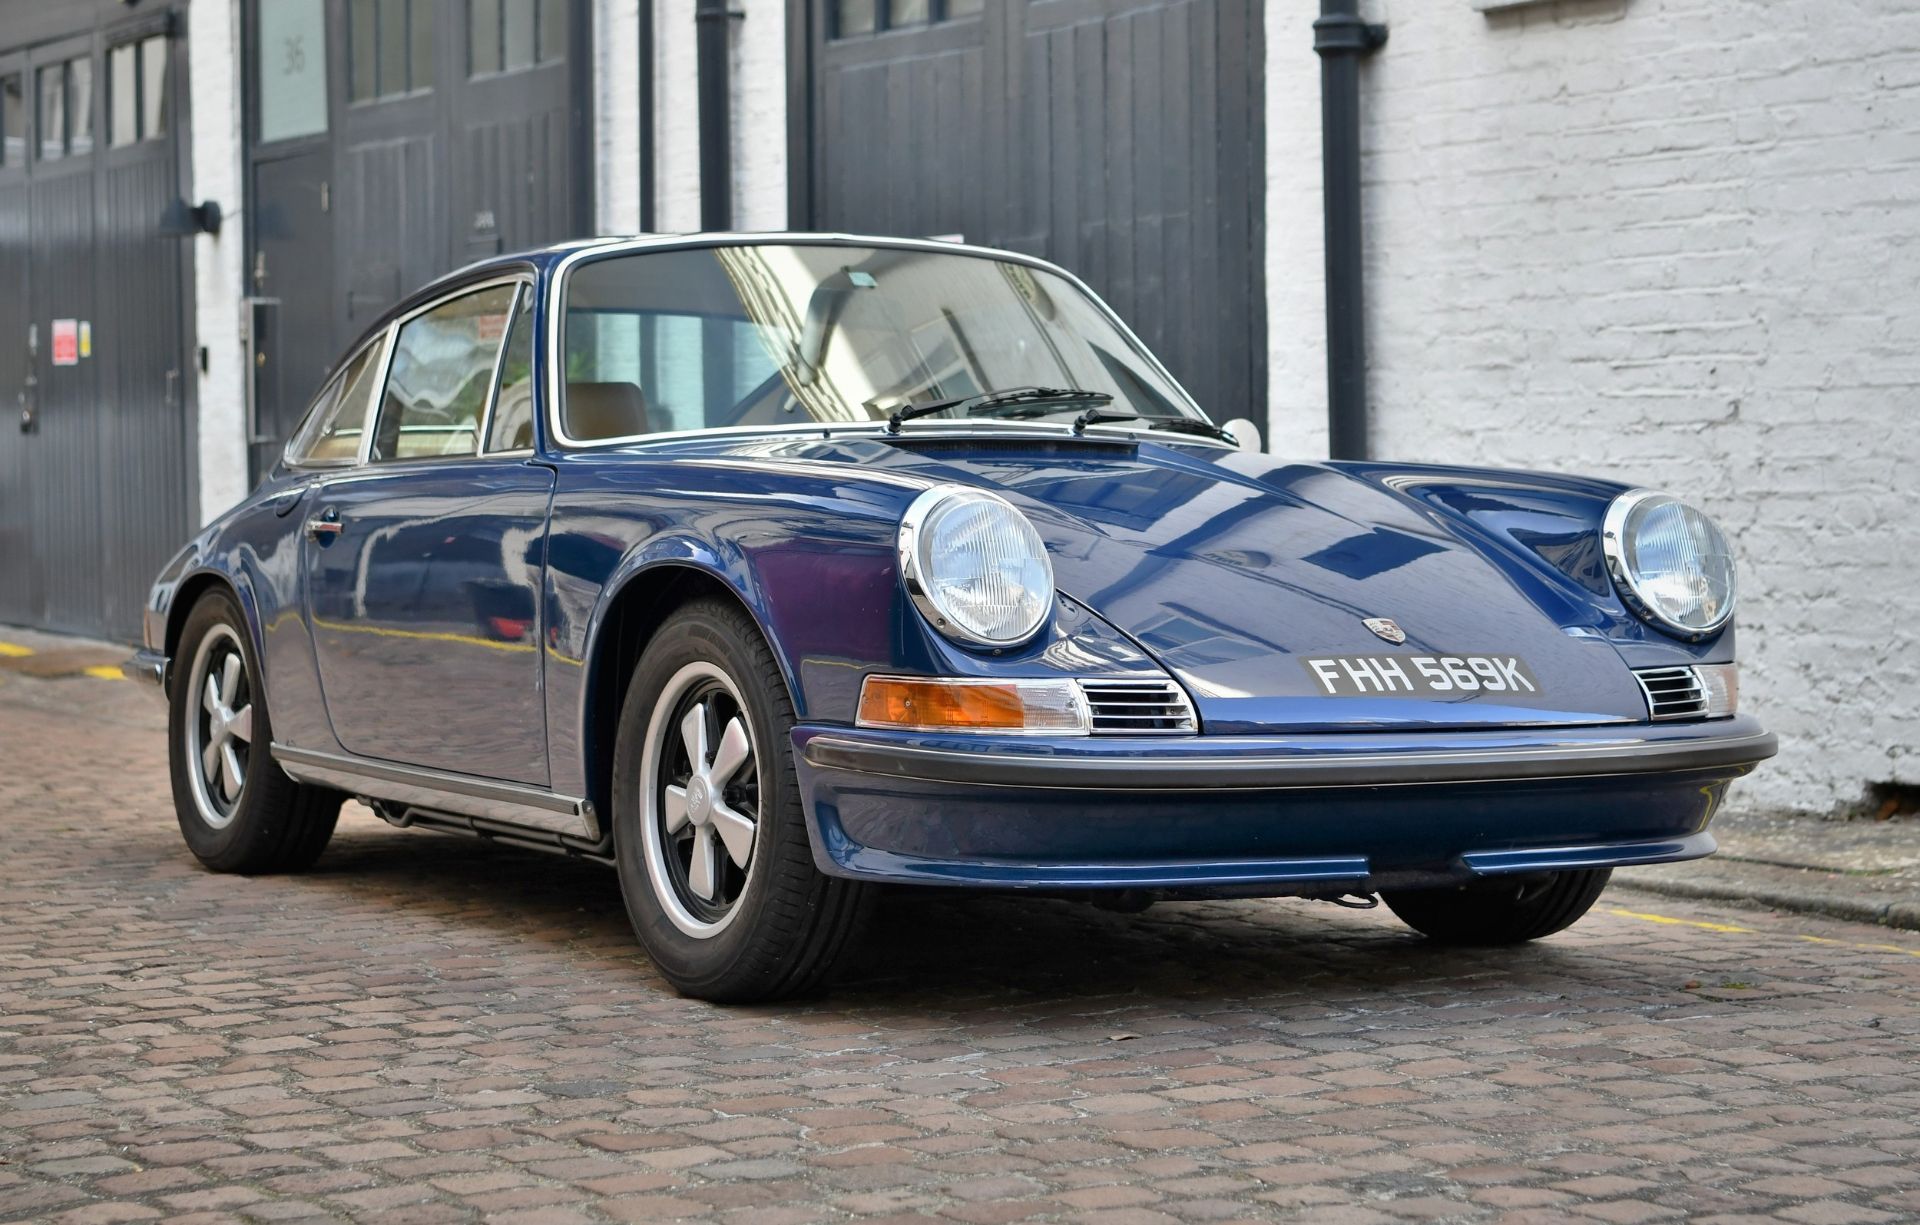 1972 PORSCHE 911 2.4 'S' 'OELKLAPPE COUPE' Registration Number : FHH 569K Chassis Number :